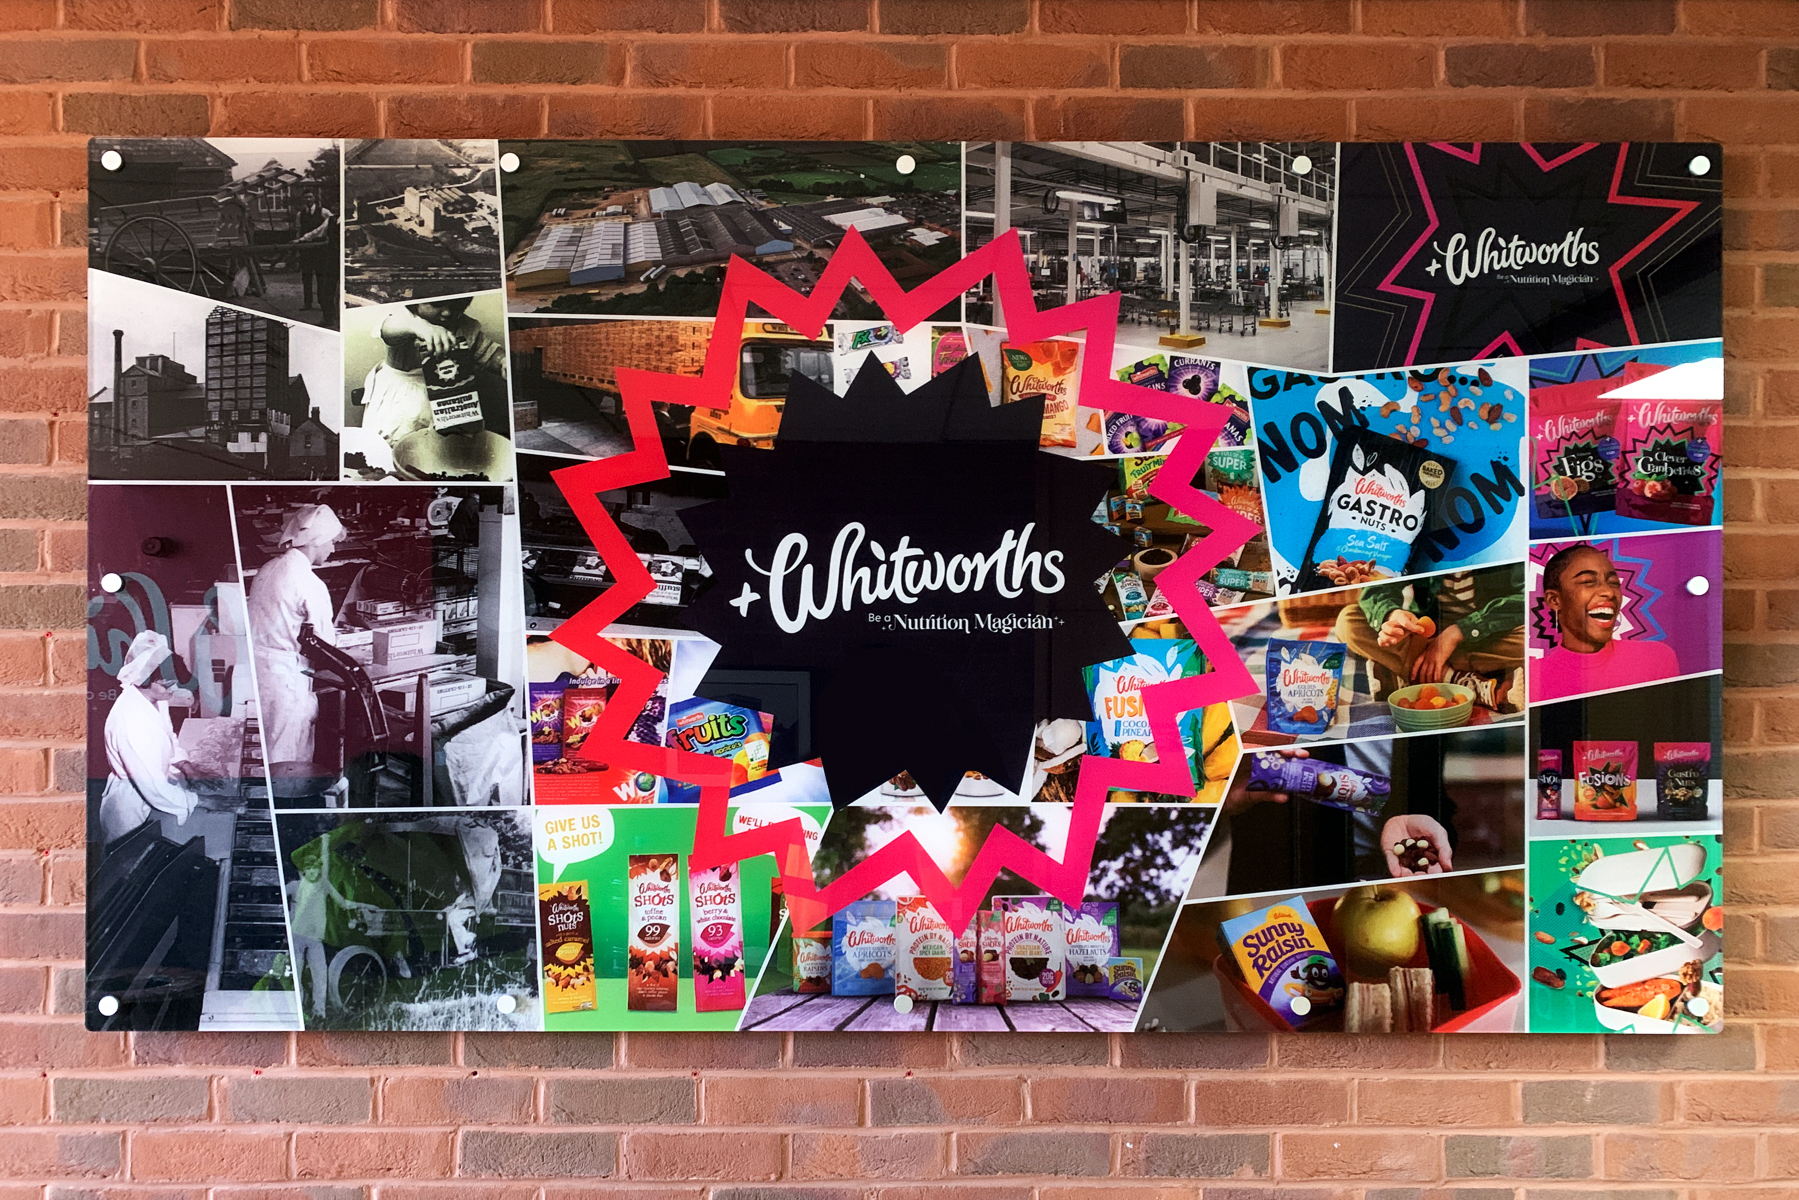 Whitworths office signage